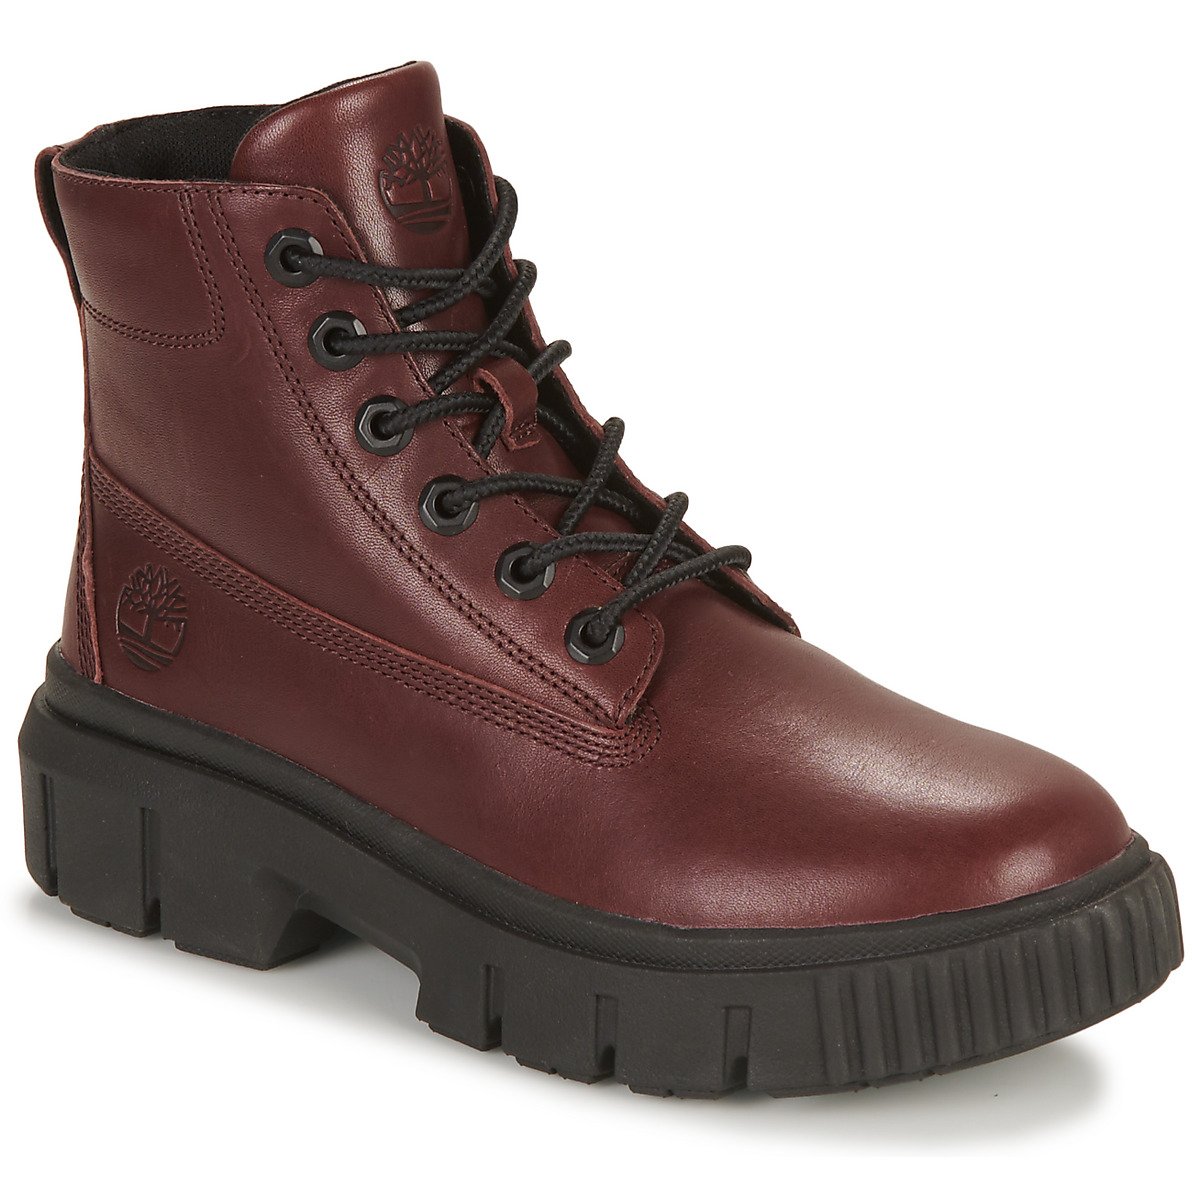 Greyfield Mid Boots "Brown"